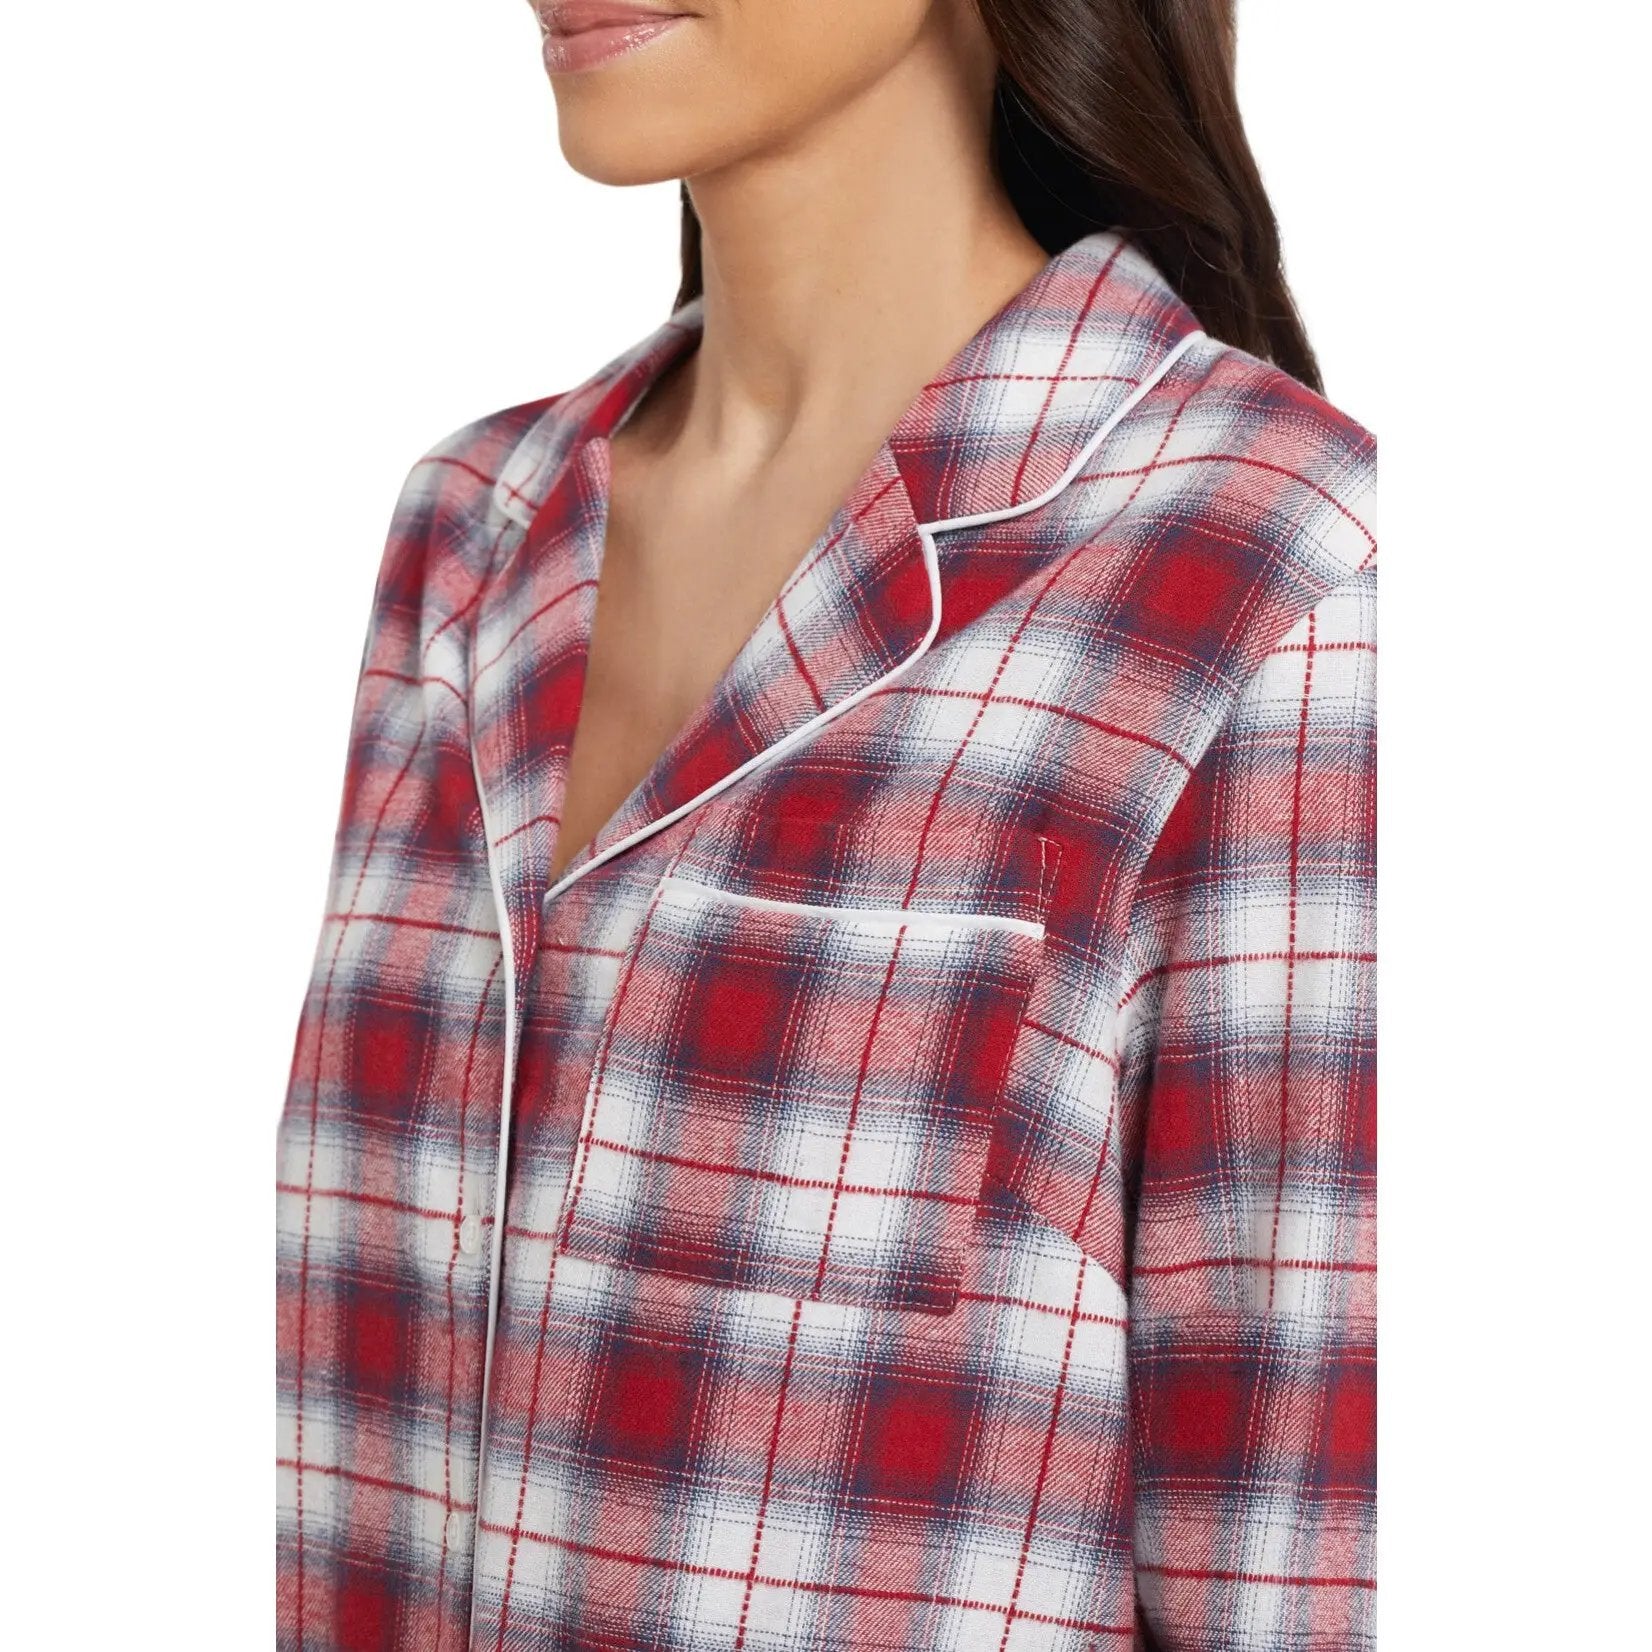 A woman wearing a Tribal Plaid Button Up Nightshirt.